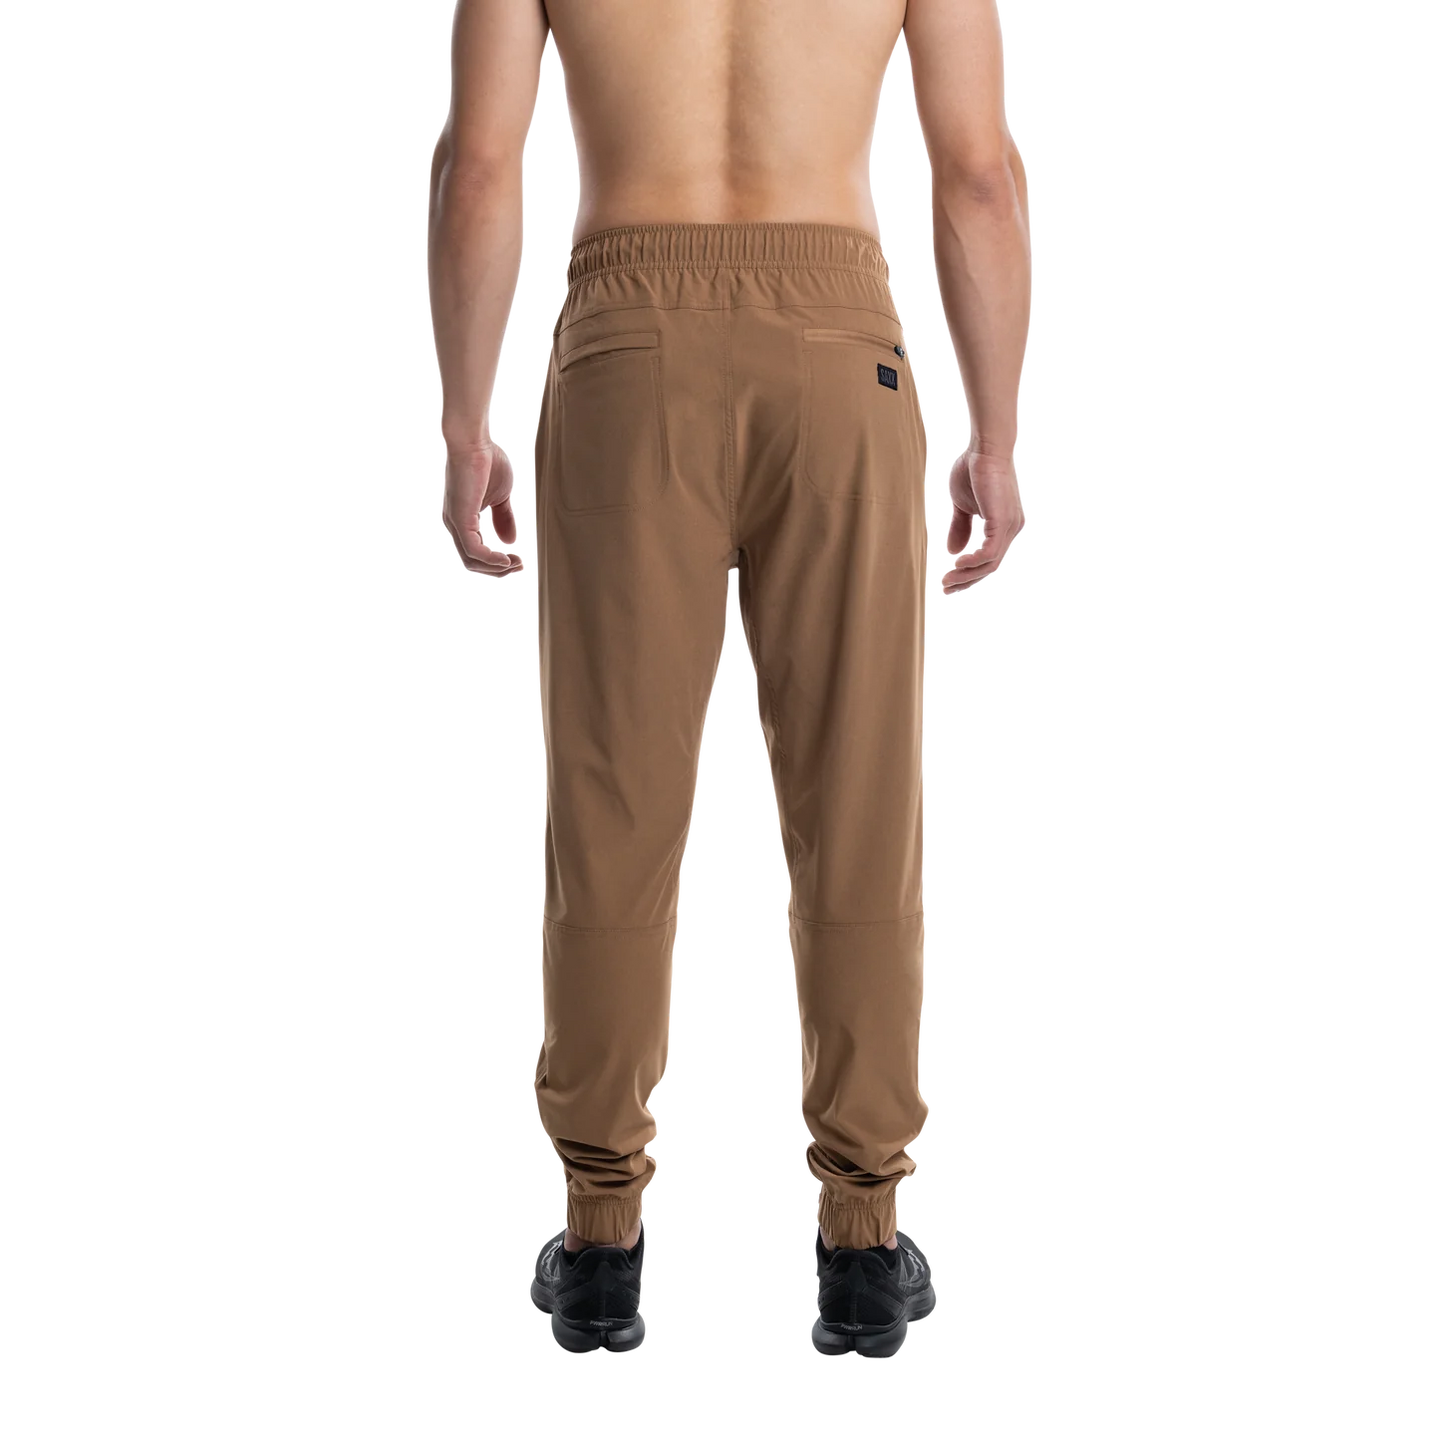 SAXX GO TO TOWN CASUAL SPORT Pants / Toasted Coconut